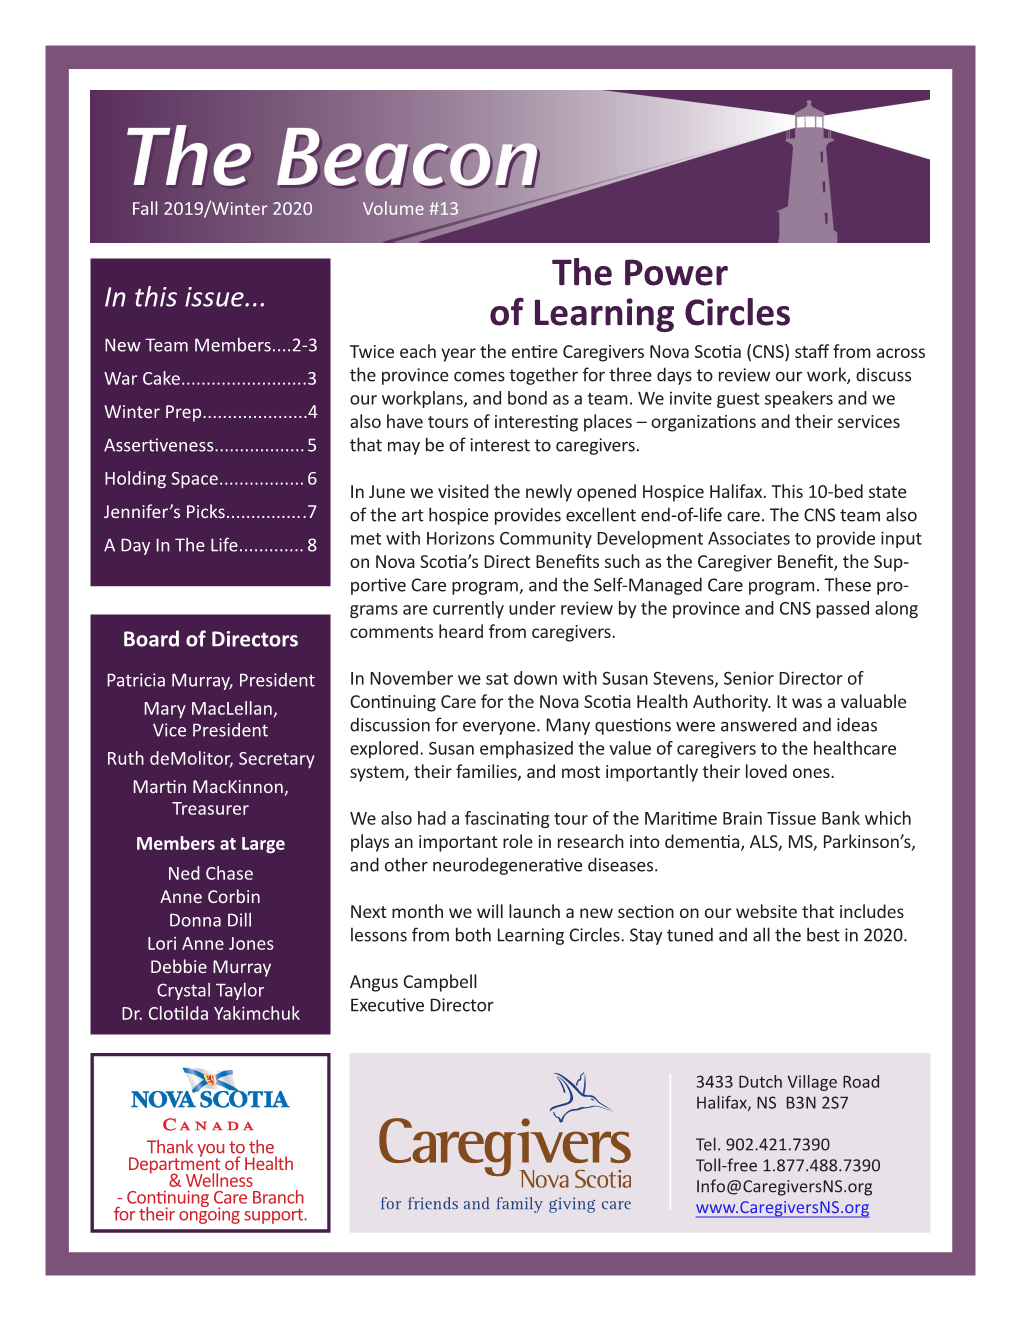 The Power of Learning Circles